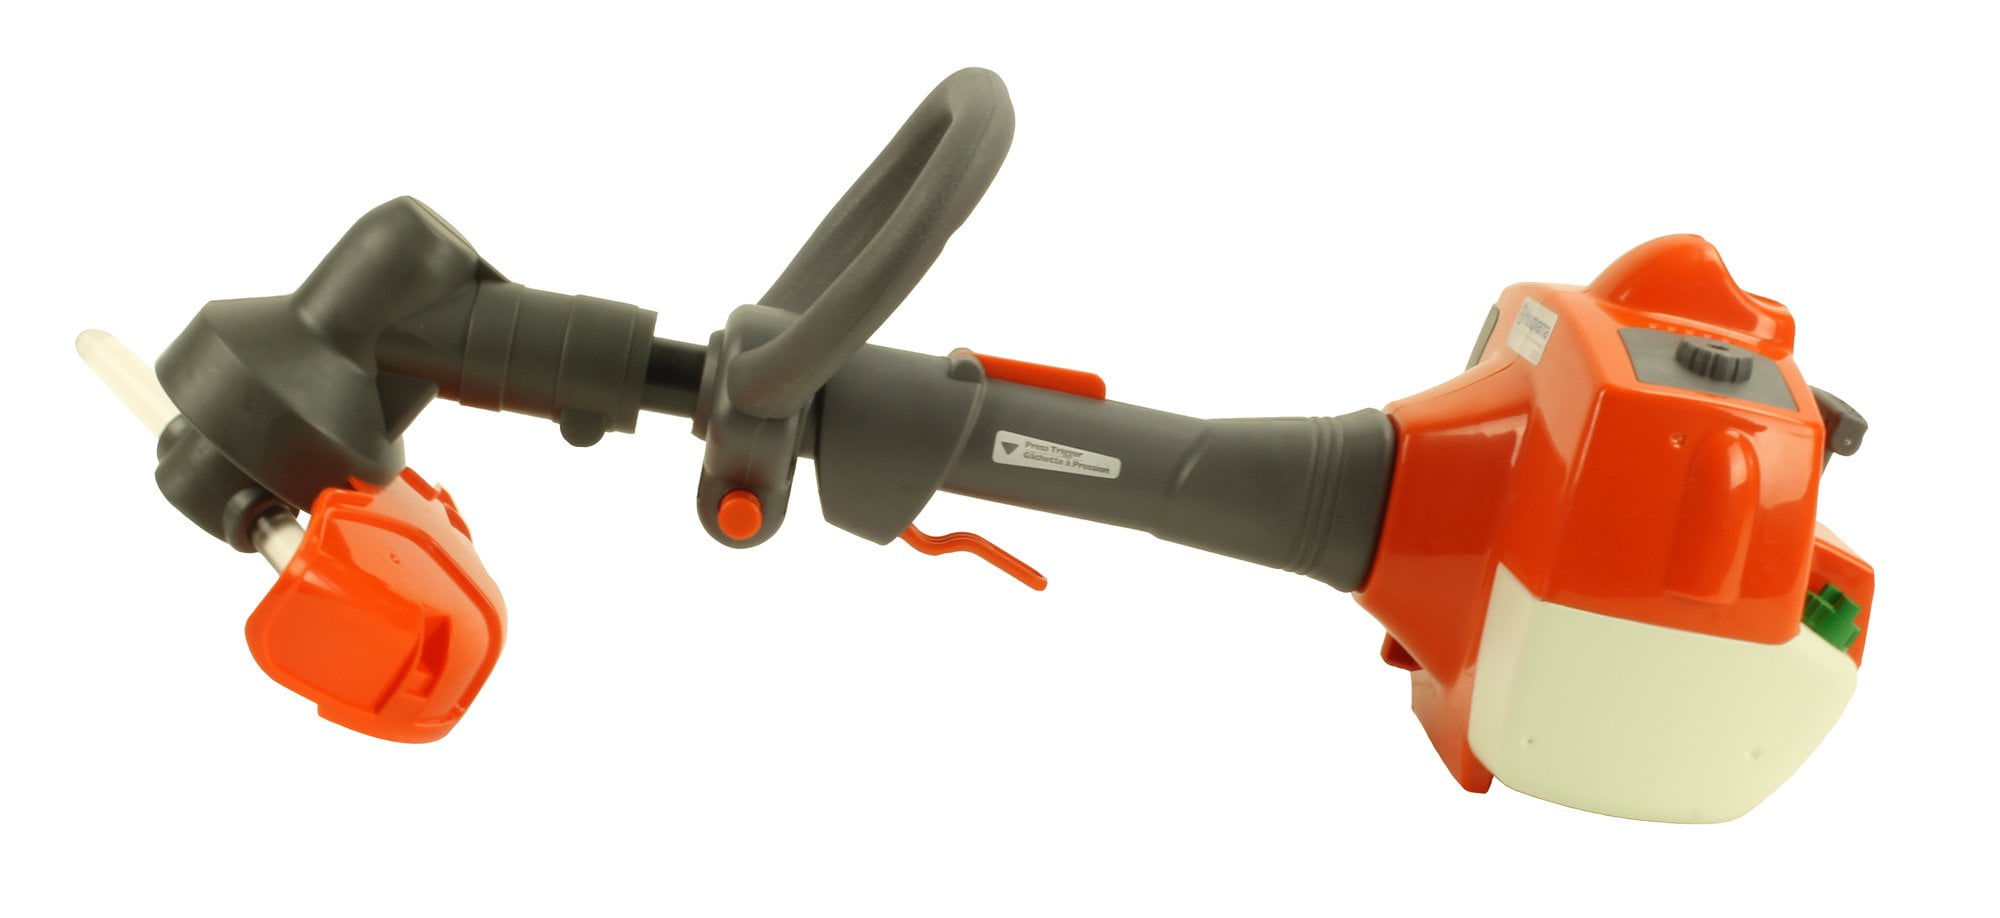 battery operated line trimmer